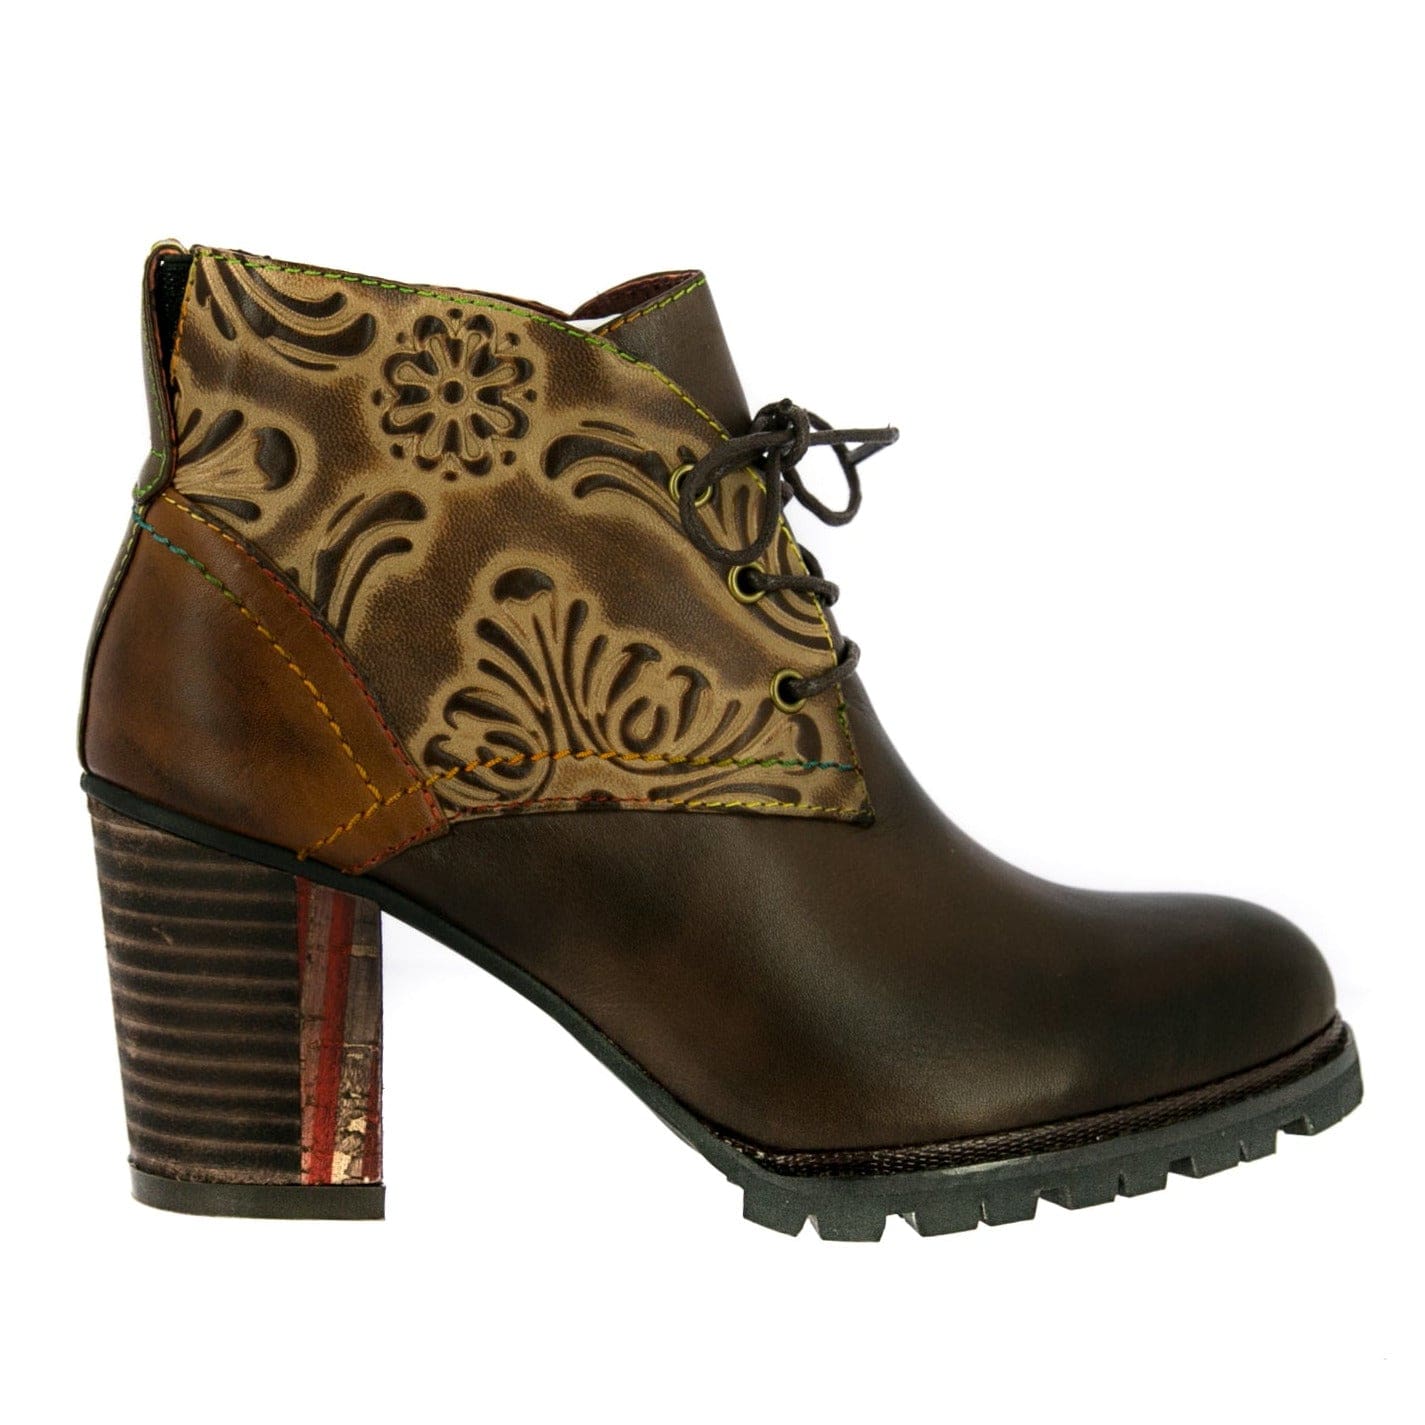 Chaussures CECILE 10 - 37 / Choco - Boots